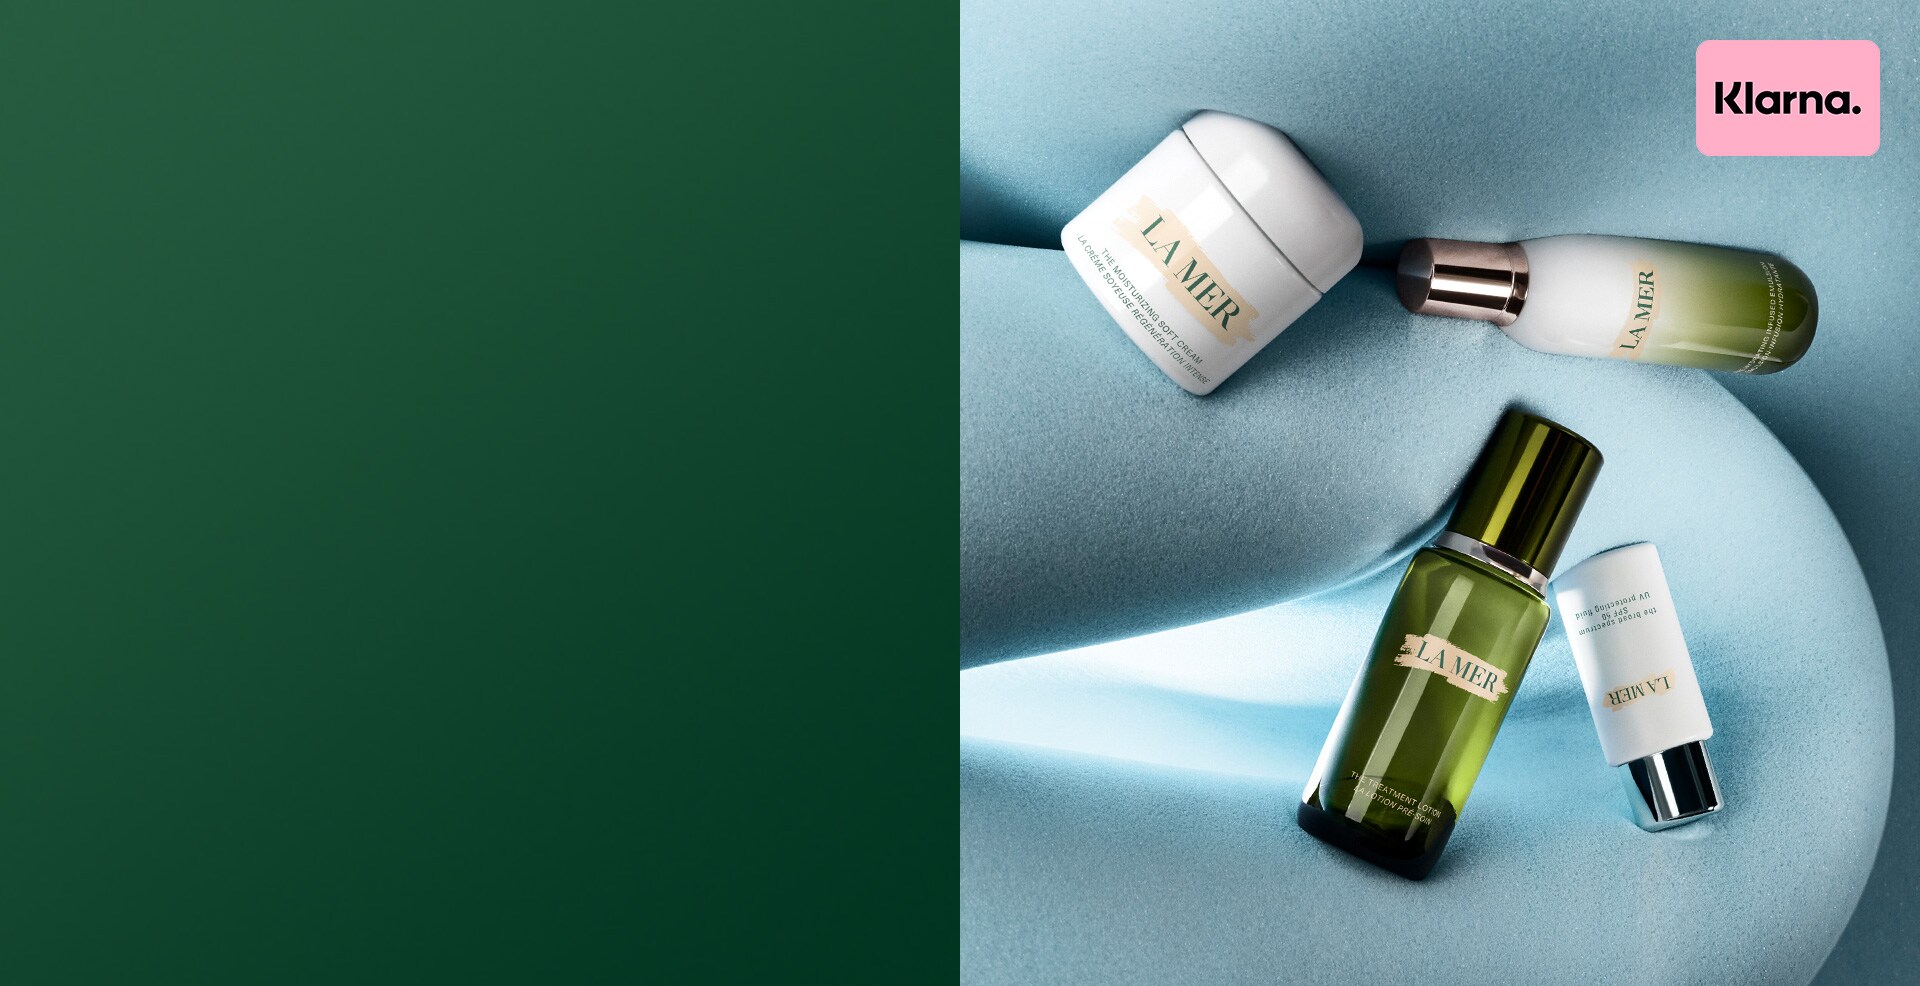 Bestselling La Mer products dynamically placed on concrete sculpture